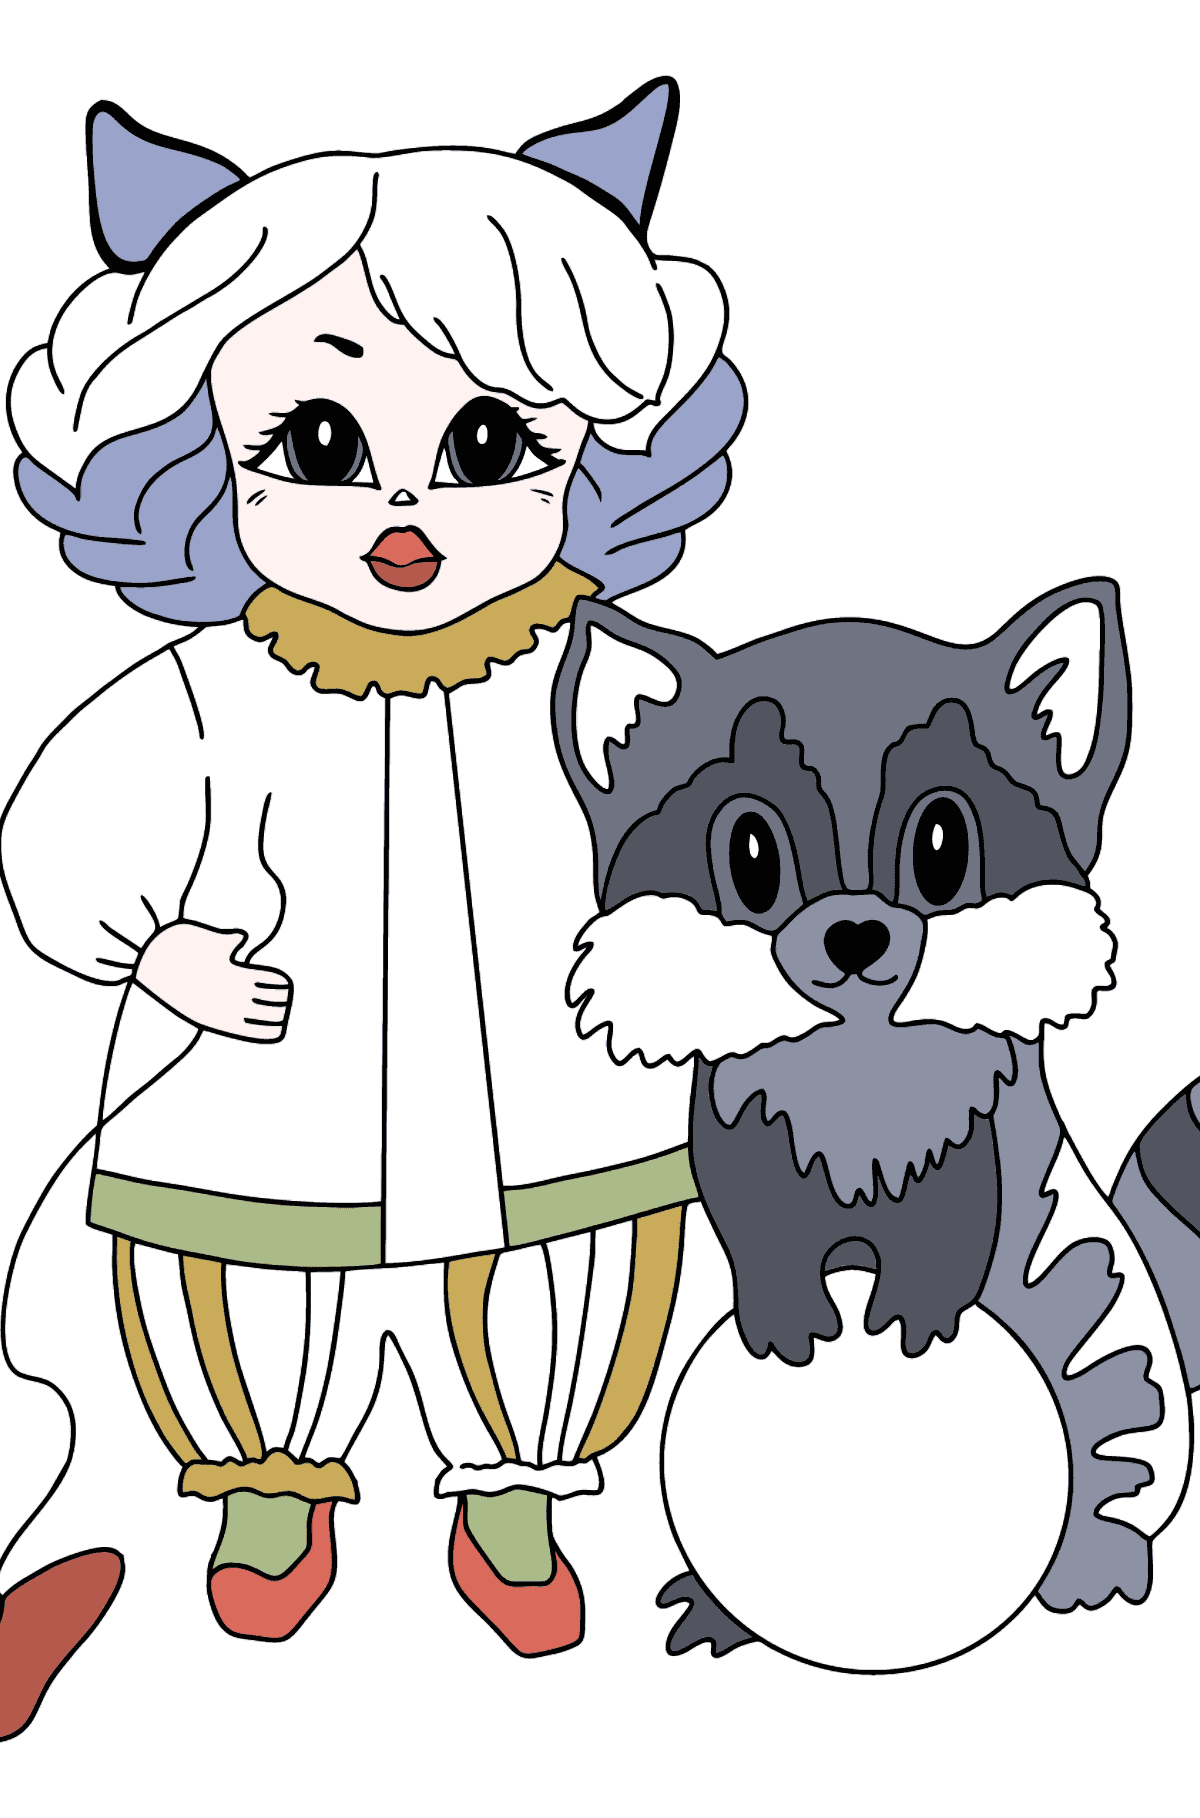 Coloring Page - A Princess with a Cat and a Racoon - For Girls - Coloring Pages for Kids